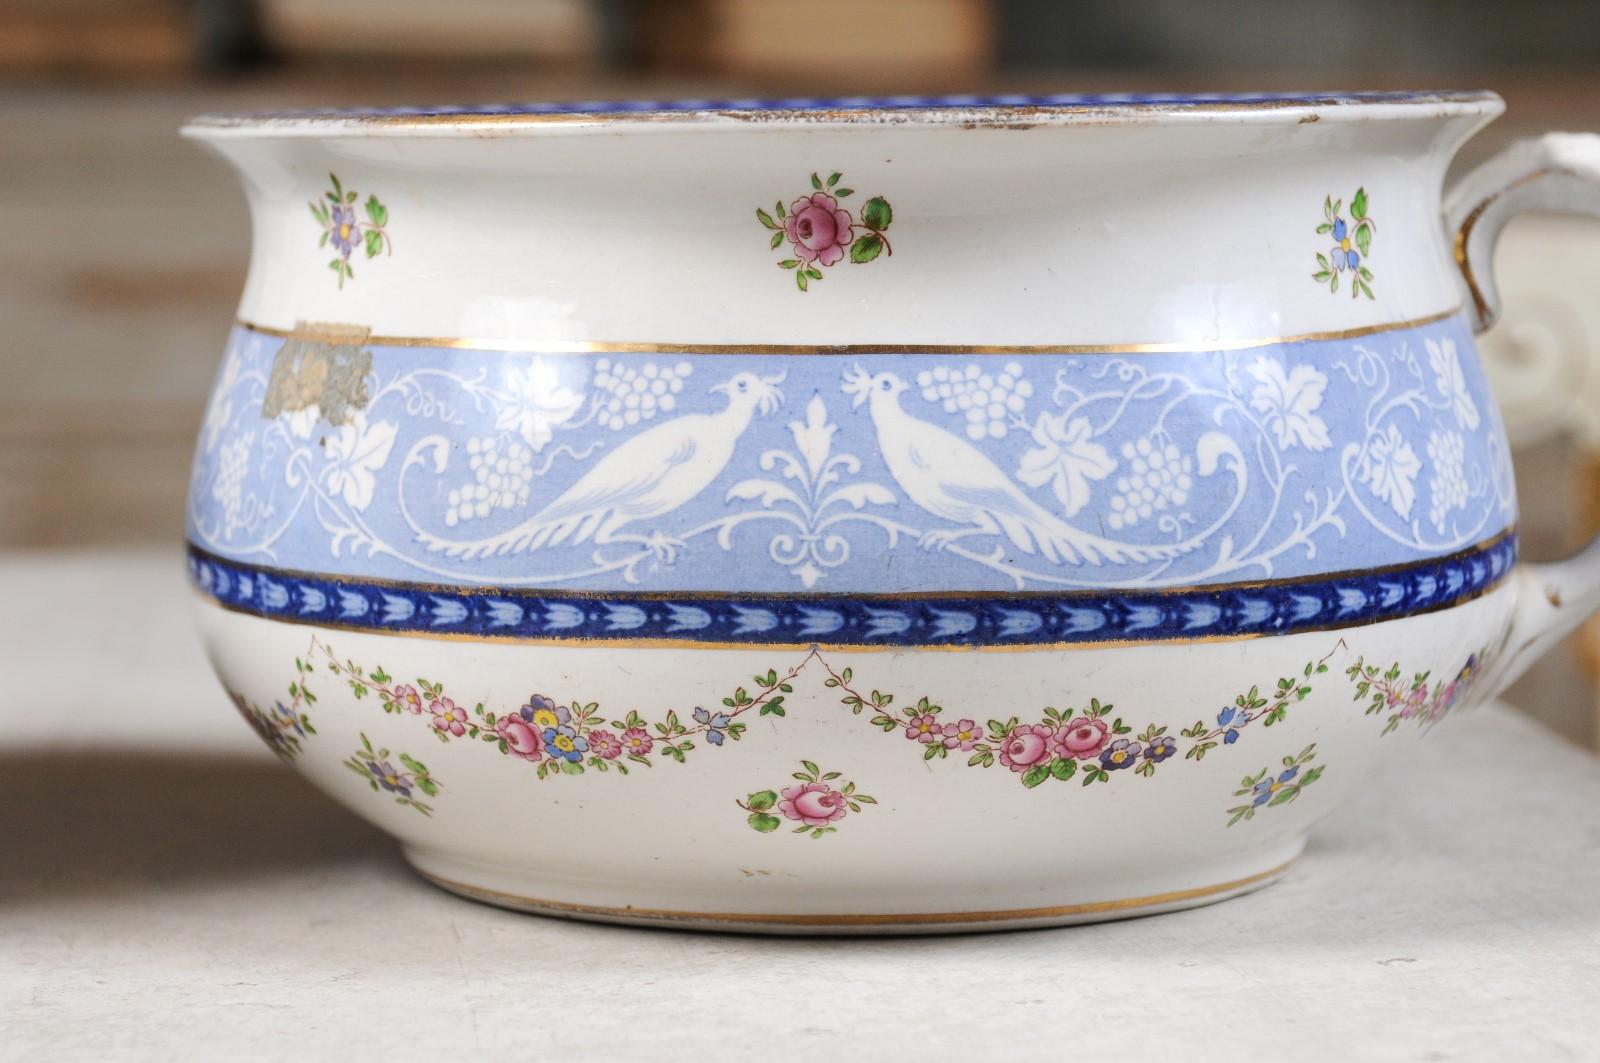 A pair of booths blue and white China bowls produced for Harrods in London, with birds and garlands of flowers, from the early 20th century. Created in England for Harrods by Booths who became known for their high quality earthenware (which they